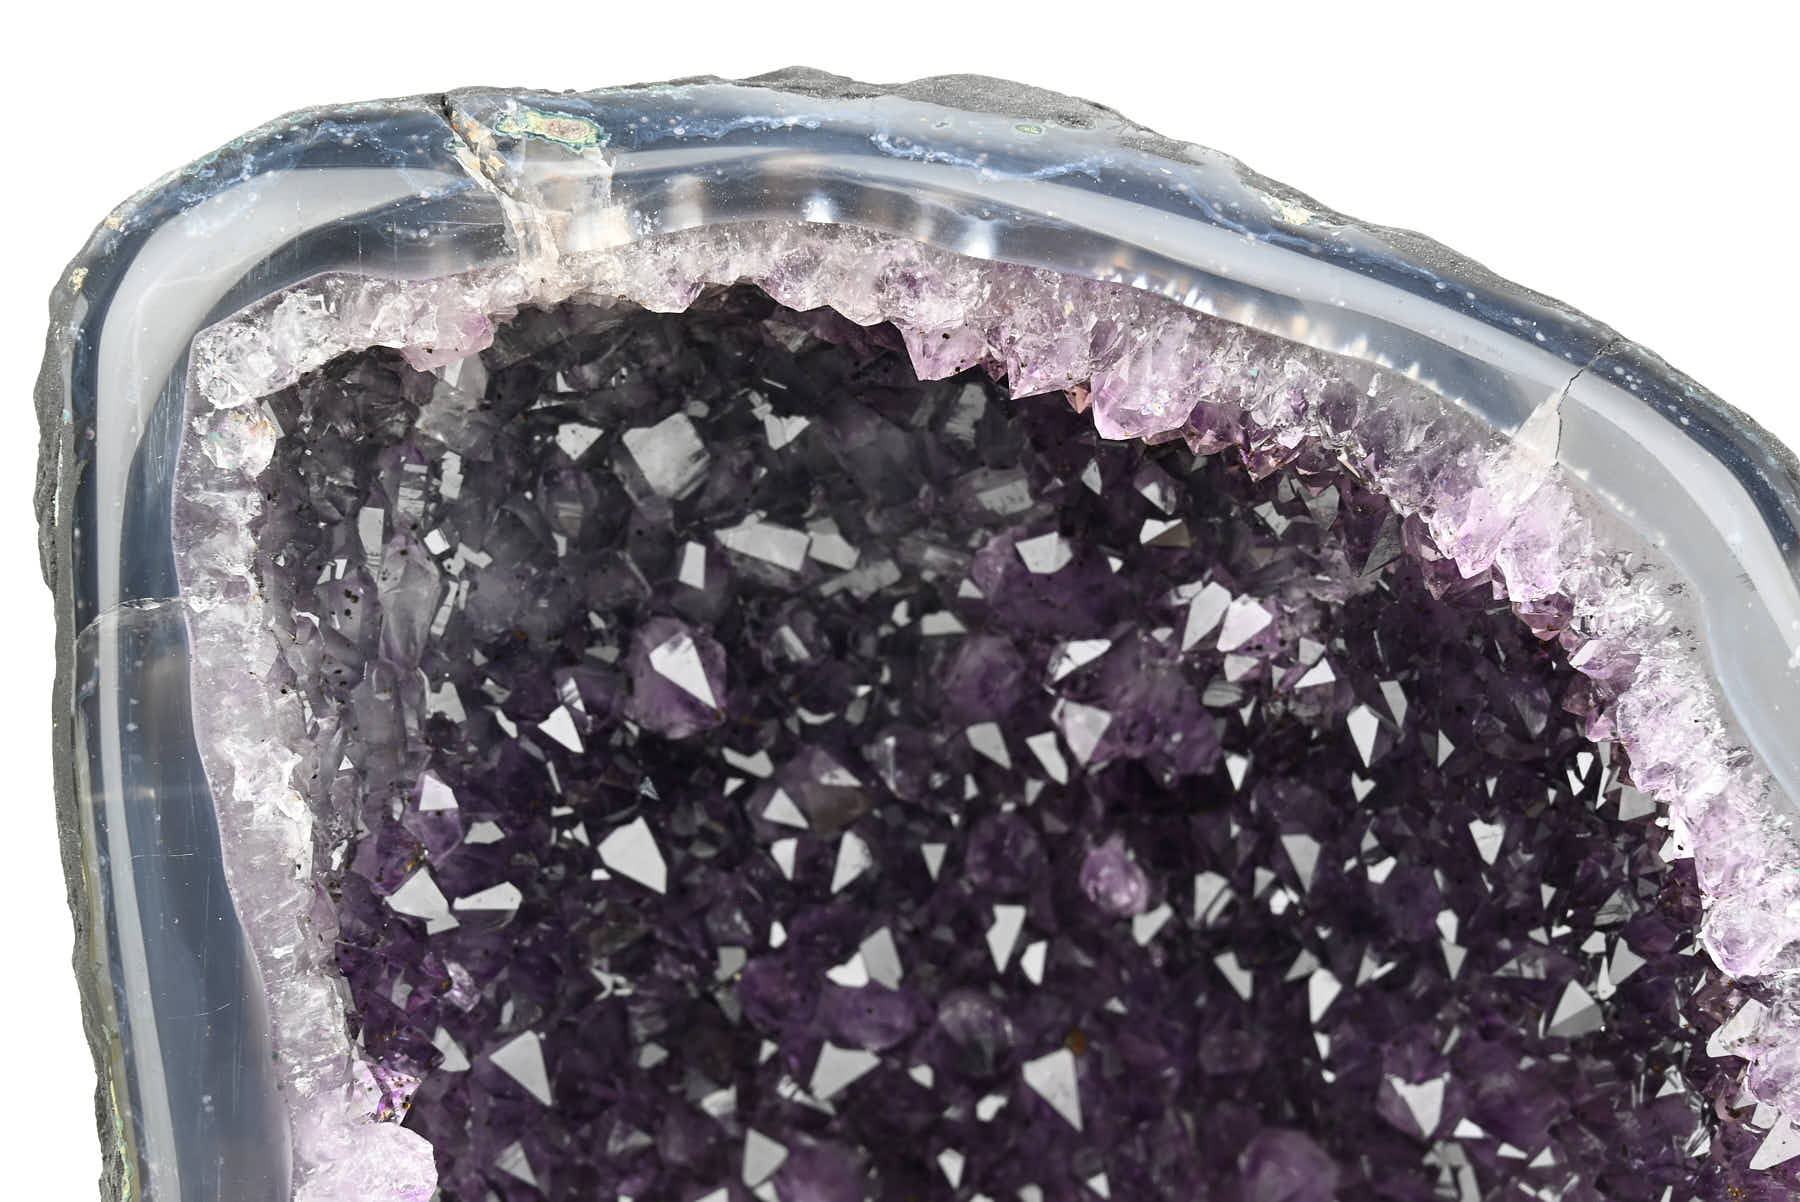 Extra Quality Amethyst Cathedral - 5.1kg, 24cm tall - #CAAMET-10027